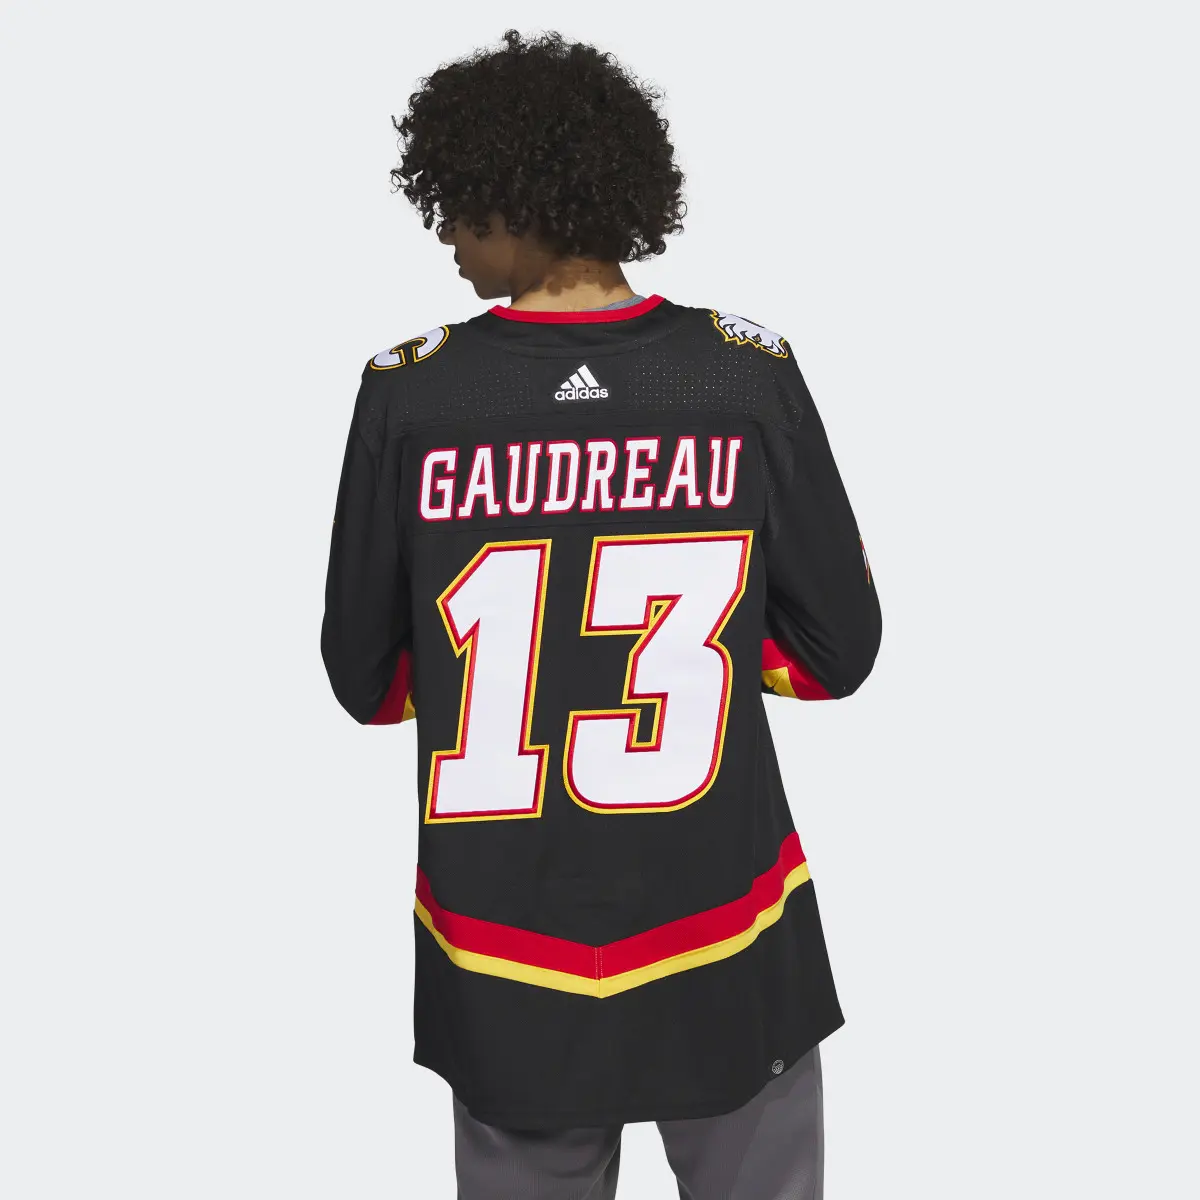 Adidas Flames Gaudreau Third Authentic Jersey. 3